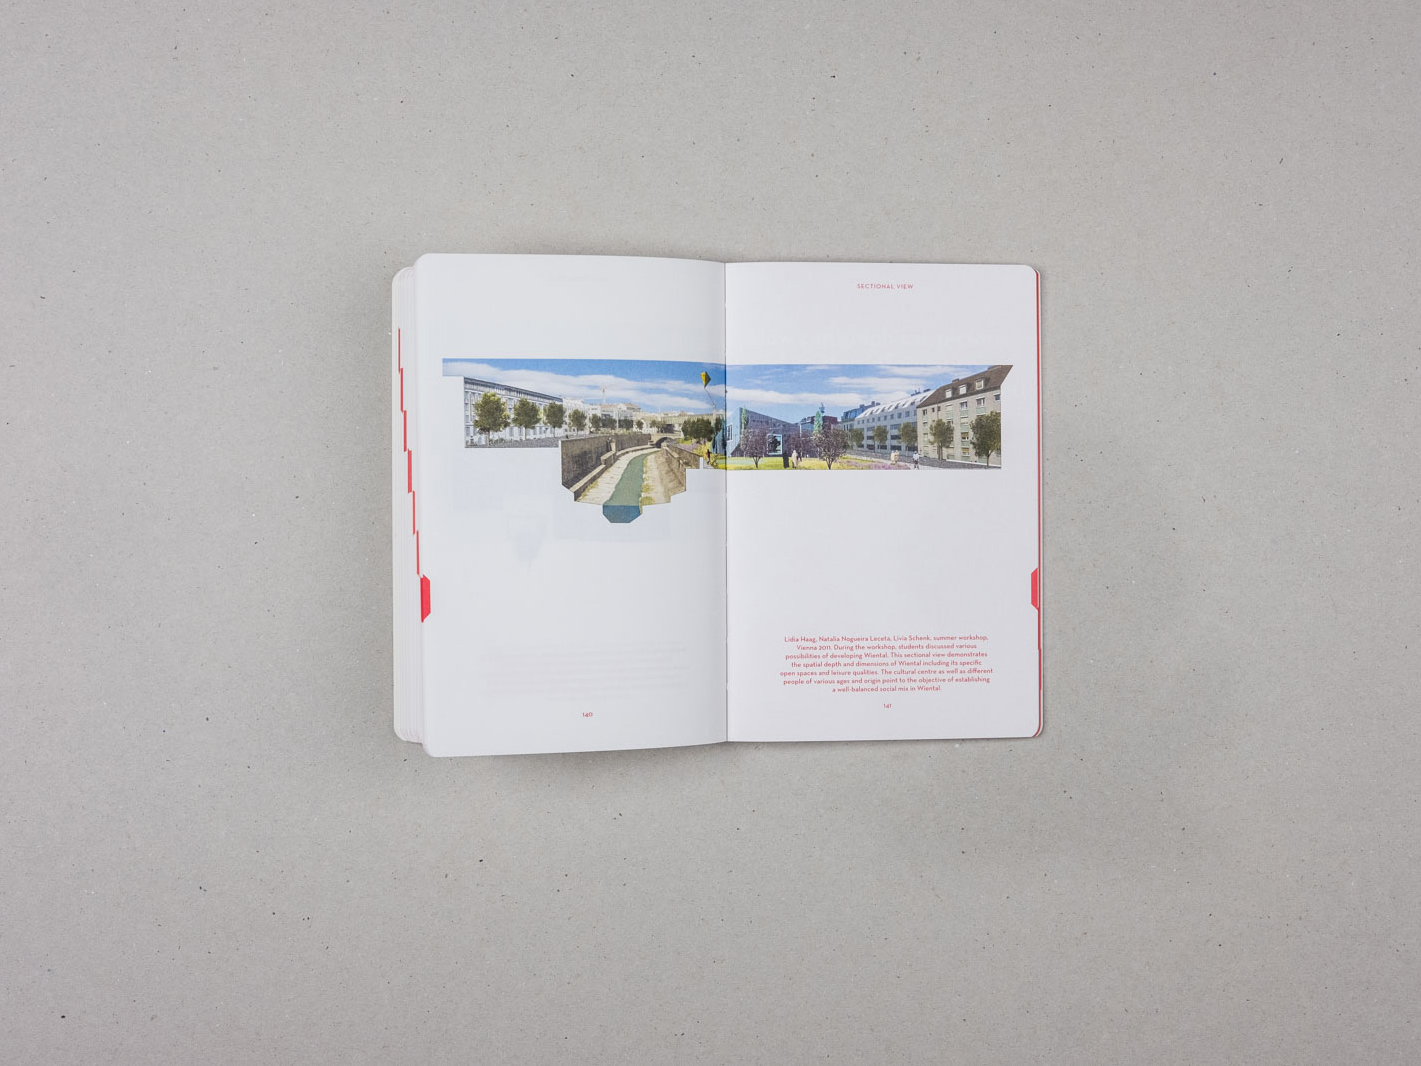 Handbook of Methods for Architecture and Urban Design - 10